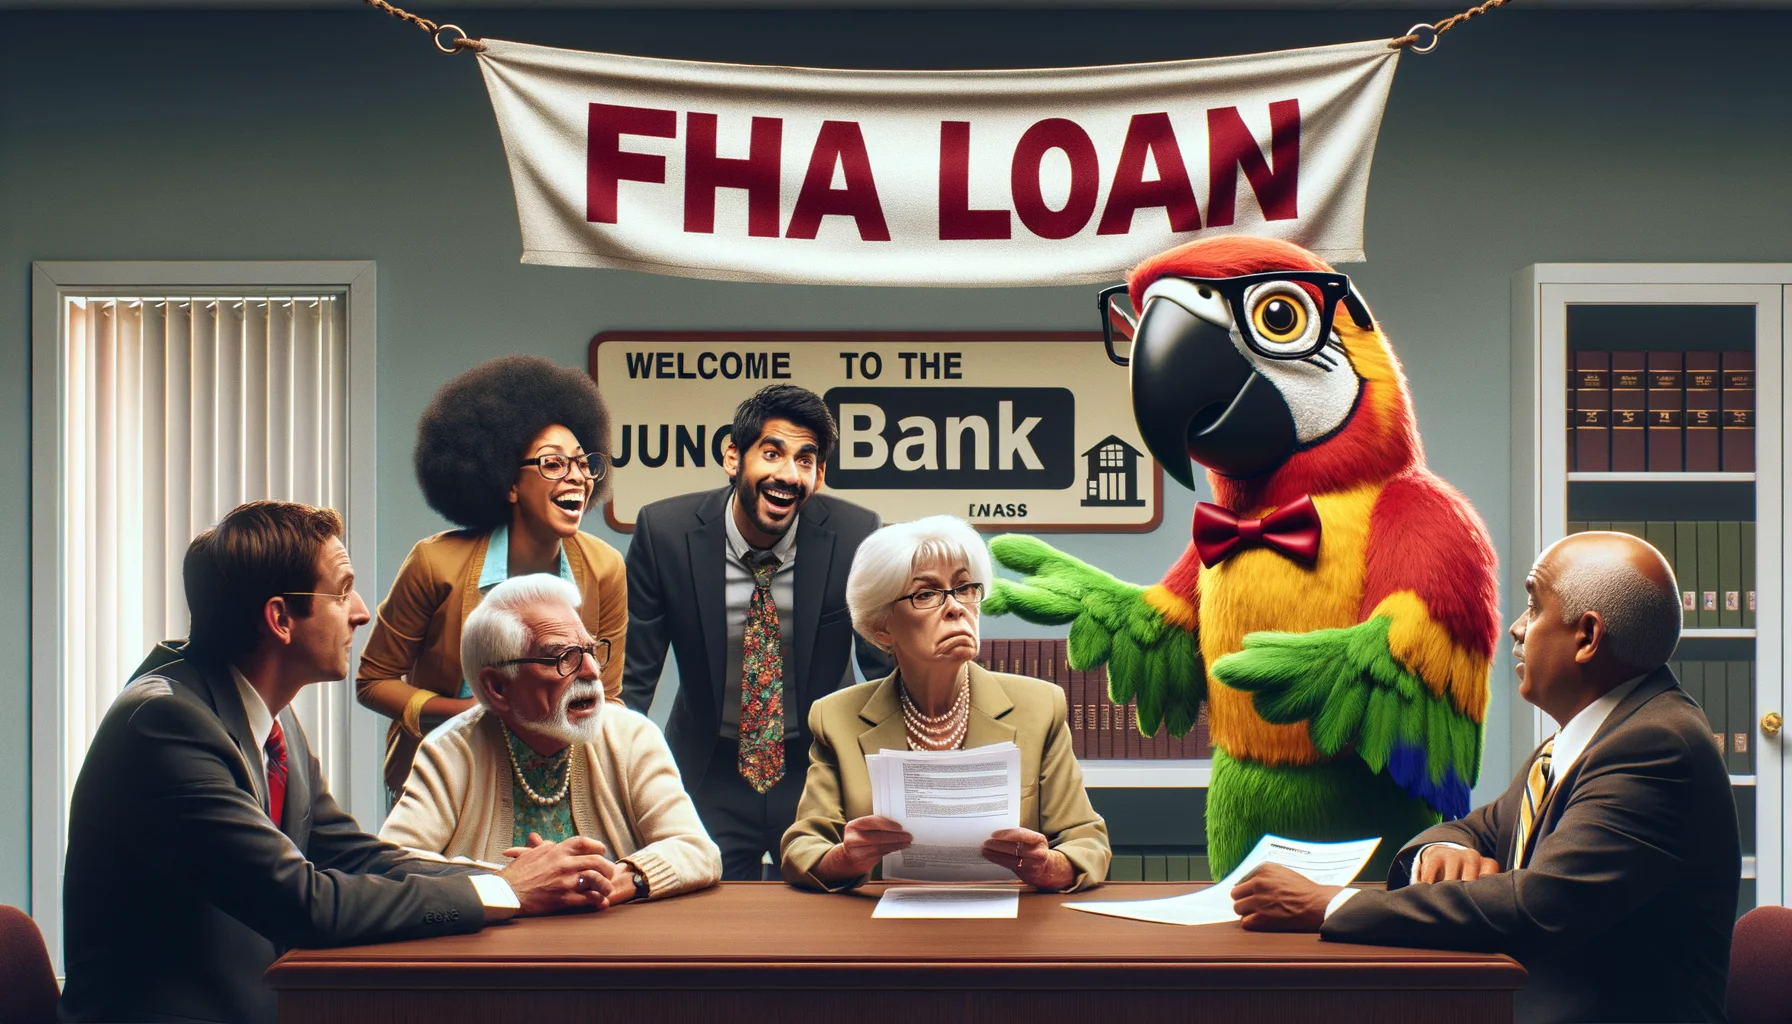 Create an amusing and realistic scene that humorously illustrates the concept of FHA loans. Imagine a setting in a bank where a sassy parrot mascot, wearing glasses and a necktie, is offering an oversized 'FHA LOAN' banner to a diverse clientele. The clients include an elderly Hispanic woman who looks confused but curious, a young black male who is laughing, and an overwhelmed South Asian couple clutching important documents. On the backdrop, a sign says 'Welcome to the Jungle of Loans' instead of 'Welcome to the Bank.'